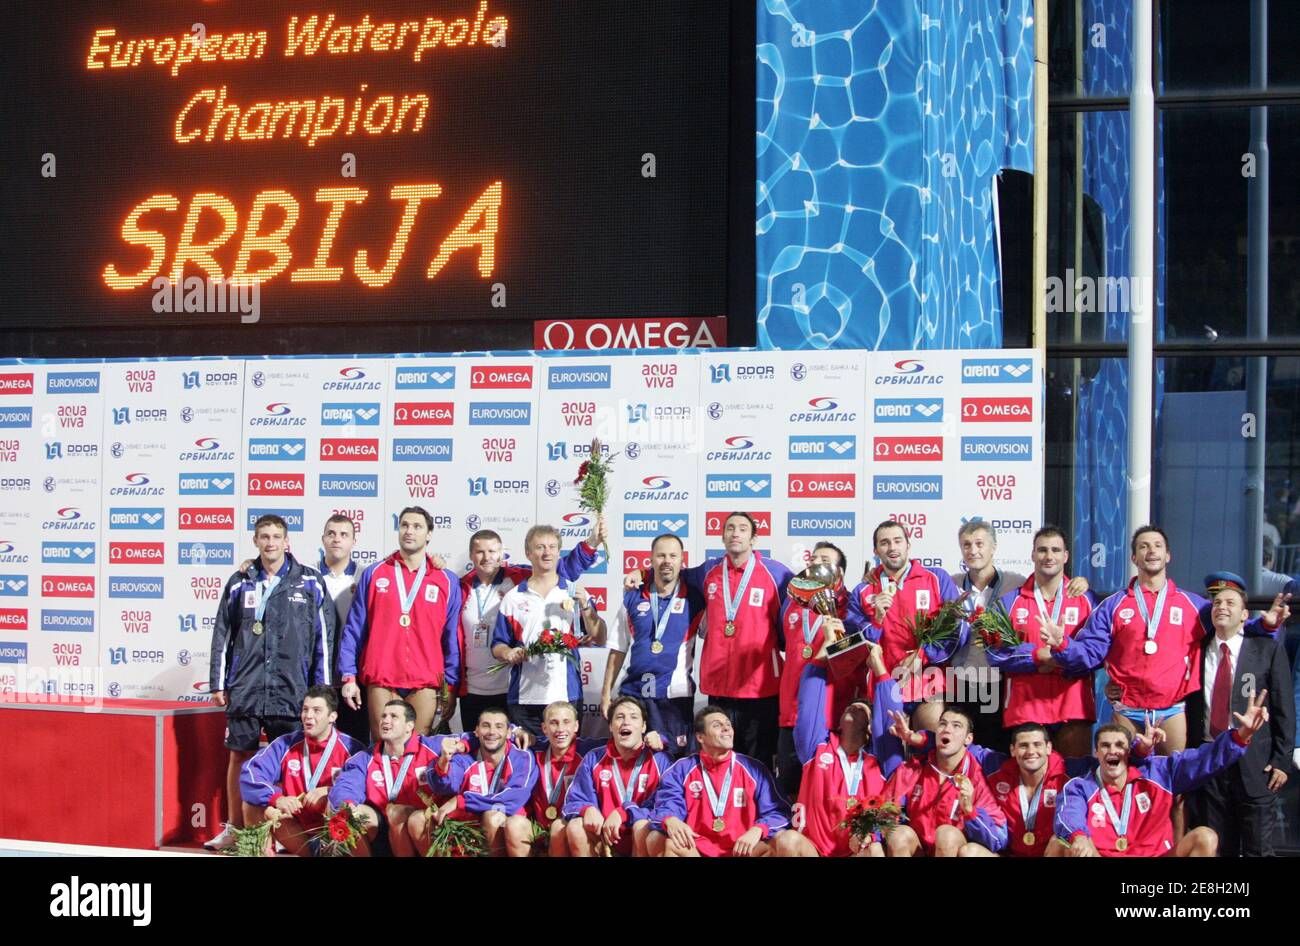 The Serbian water polo team celebrate their victory over Hungary during their gold medal match in the water polo European Championship in Belgrade September 10, 2006.  REUTERS/Ivan Milutinovic  (SERBIA) Stock Photo